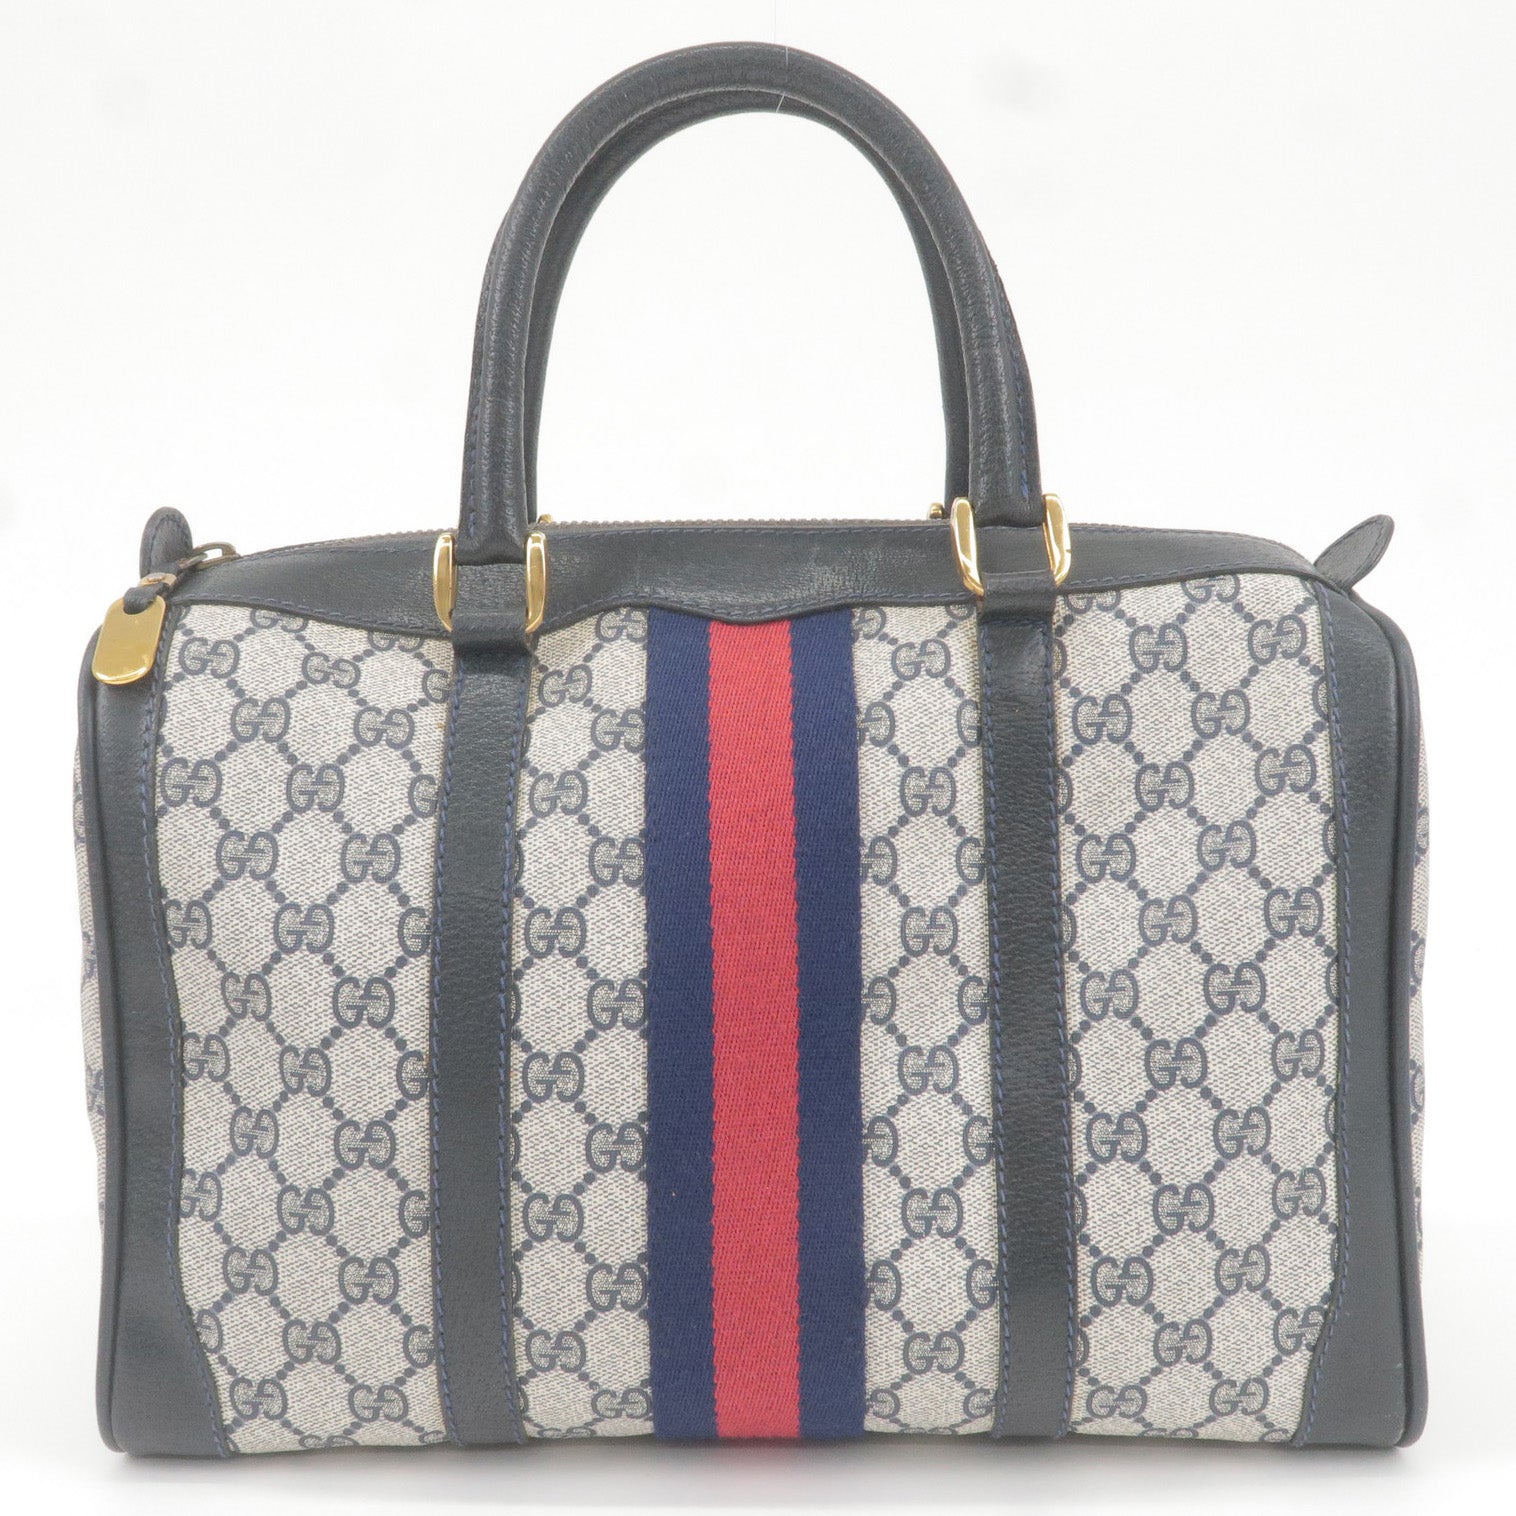 Vintage Gucci Ophidia bag in very good condition Grey Dark blue